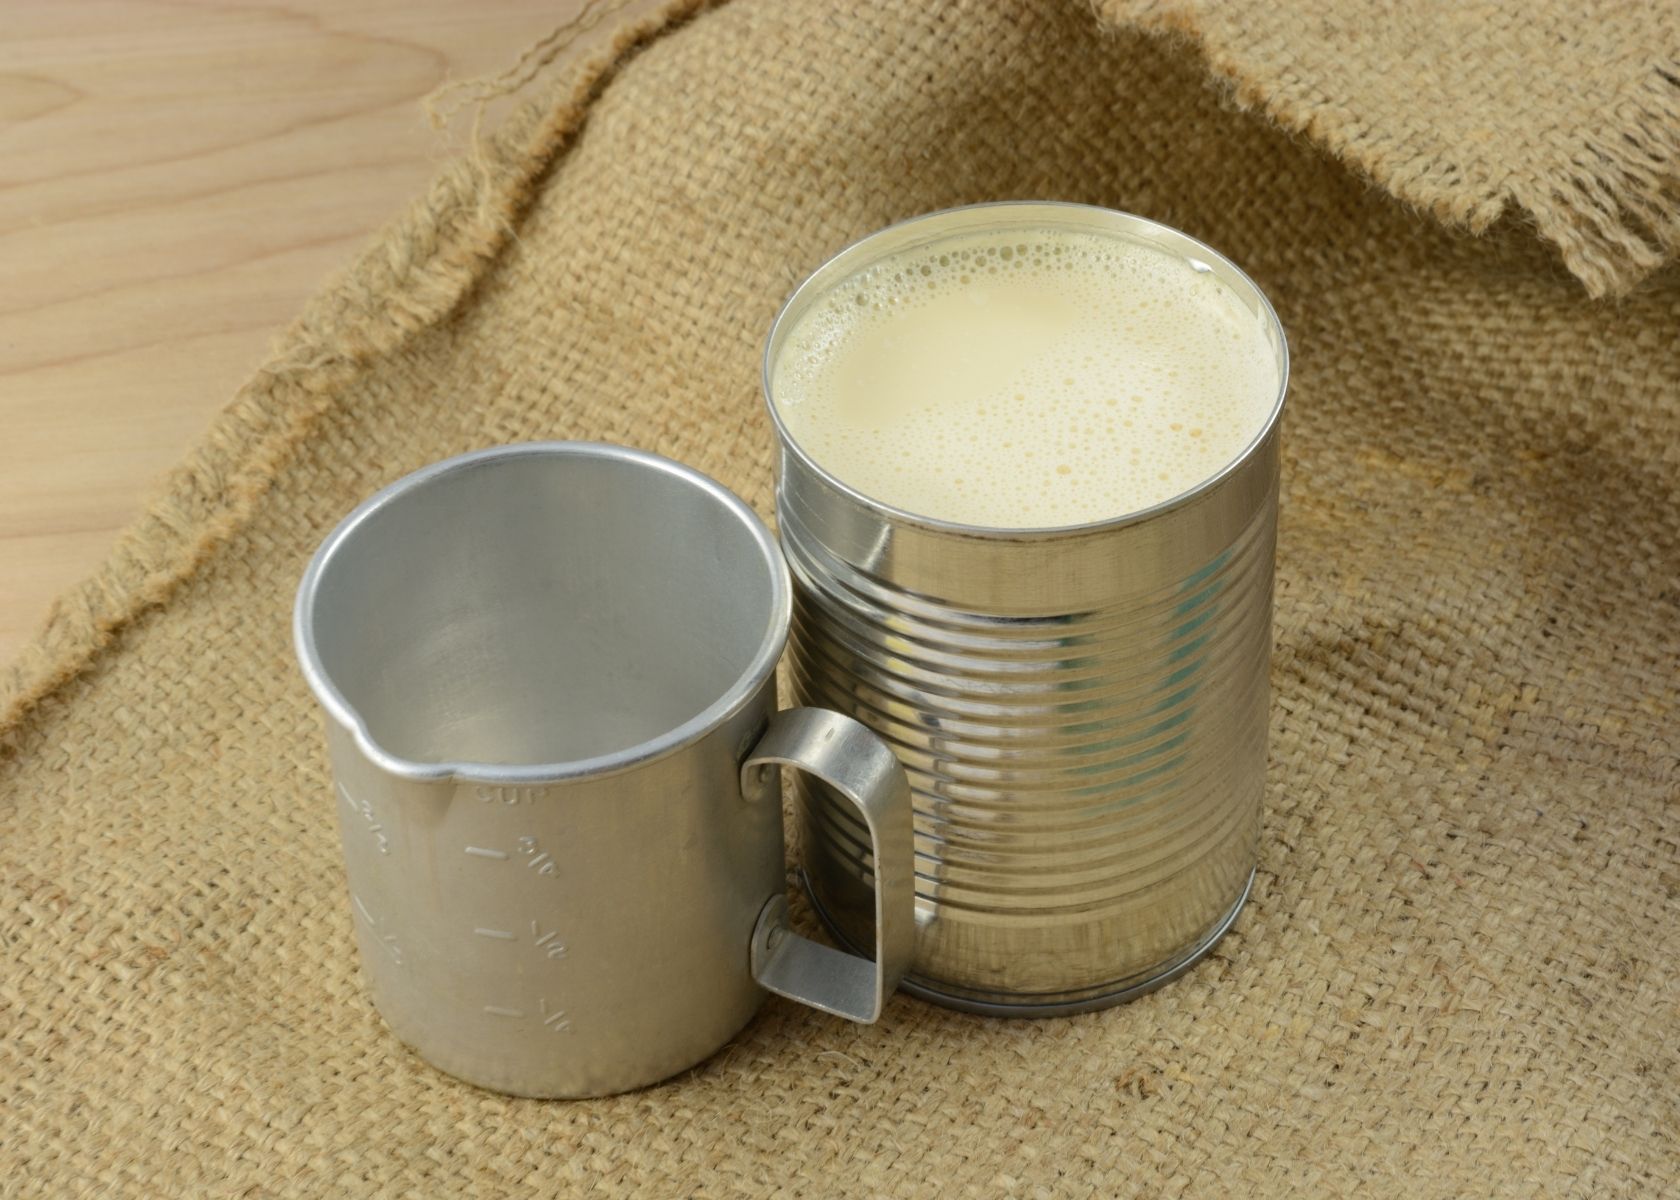 Evaporated milk in can next to measuring cup on a burlap cloth.